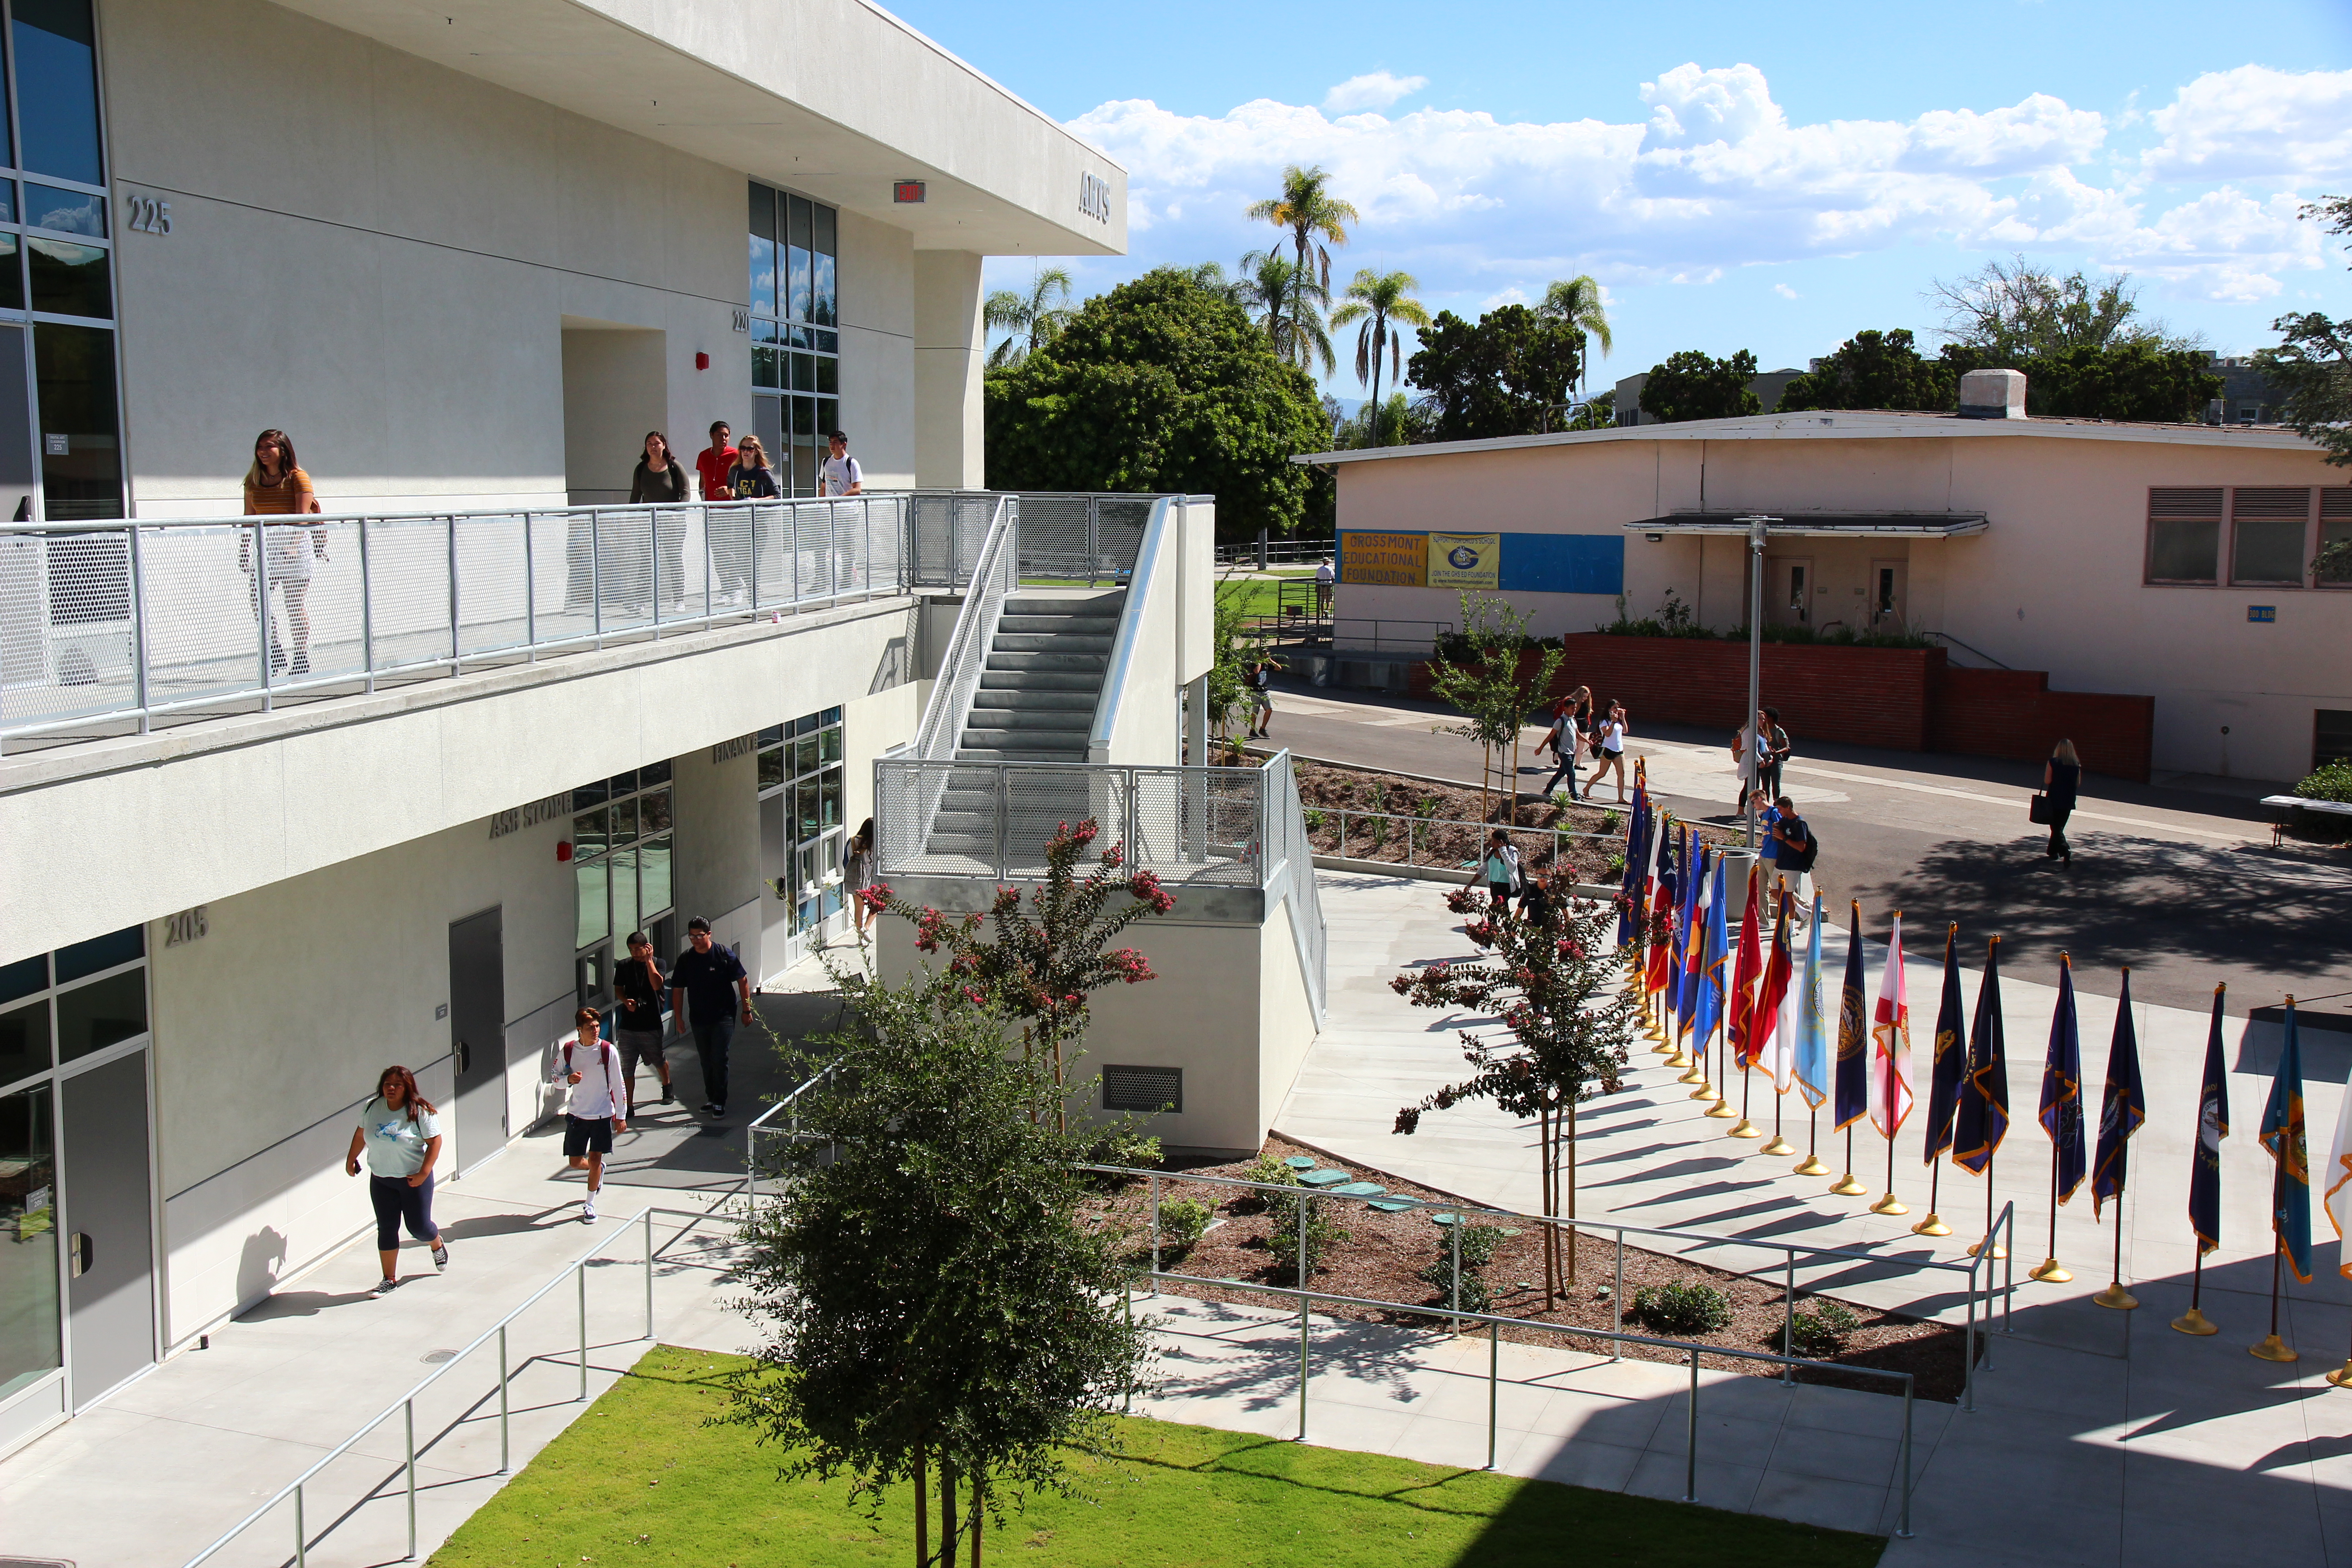 One of the new buildings at Grossmont High School.